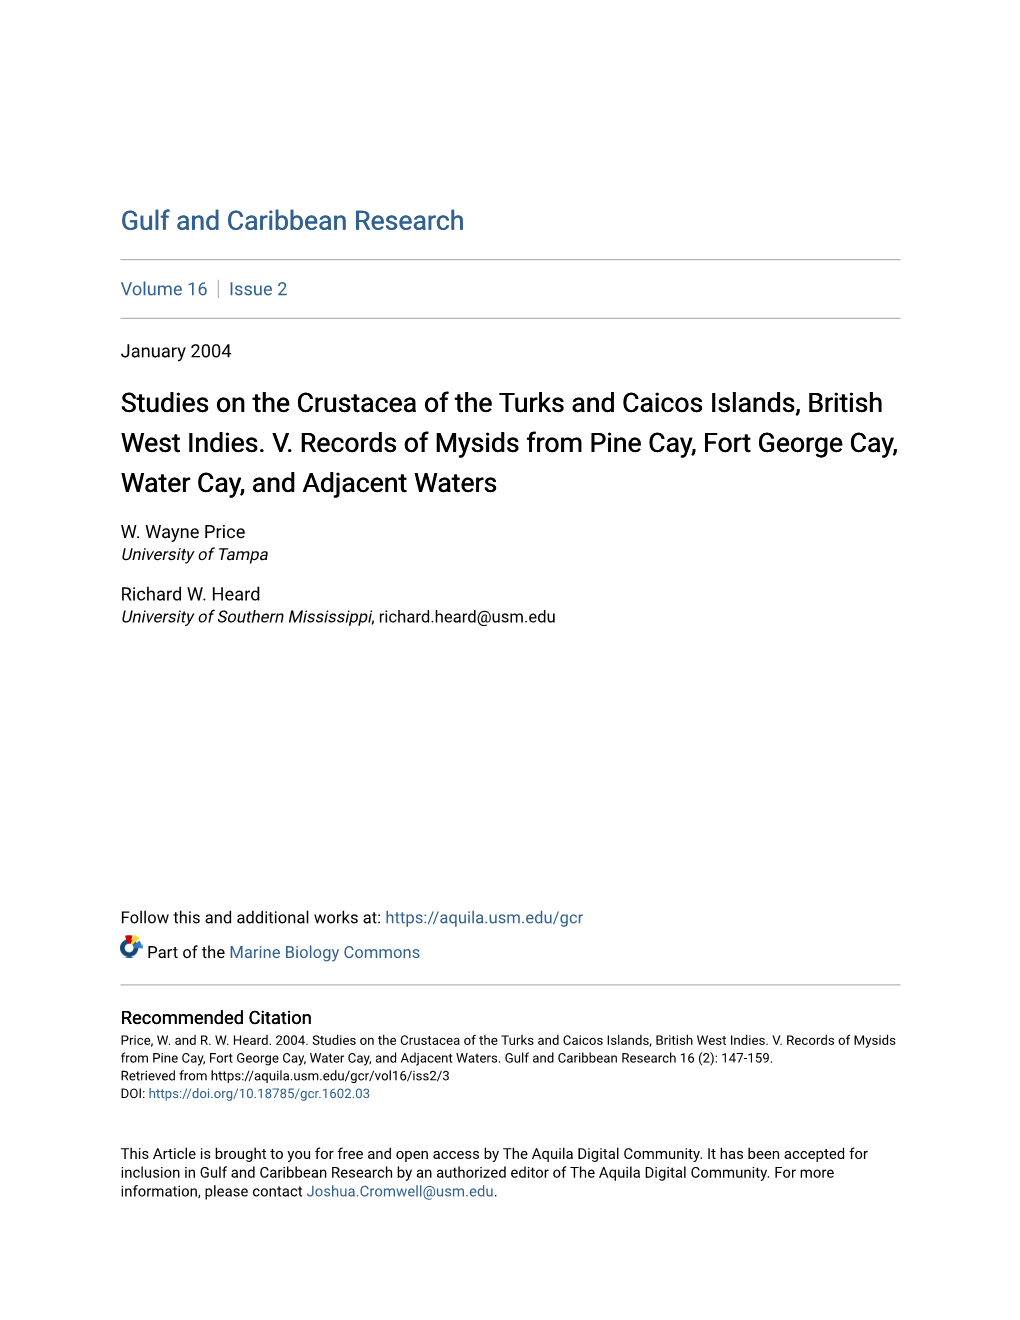 Studies on the Crustacea of the Turks and Caicos Islands, British West Indies